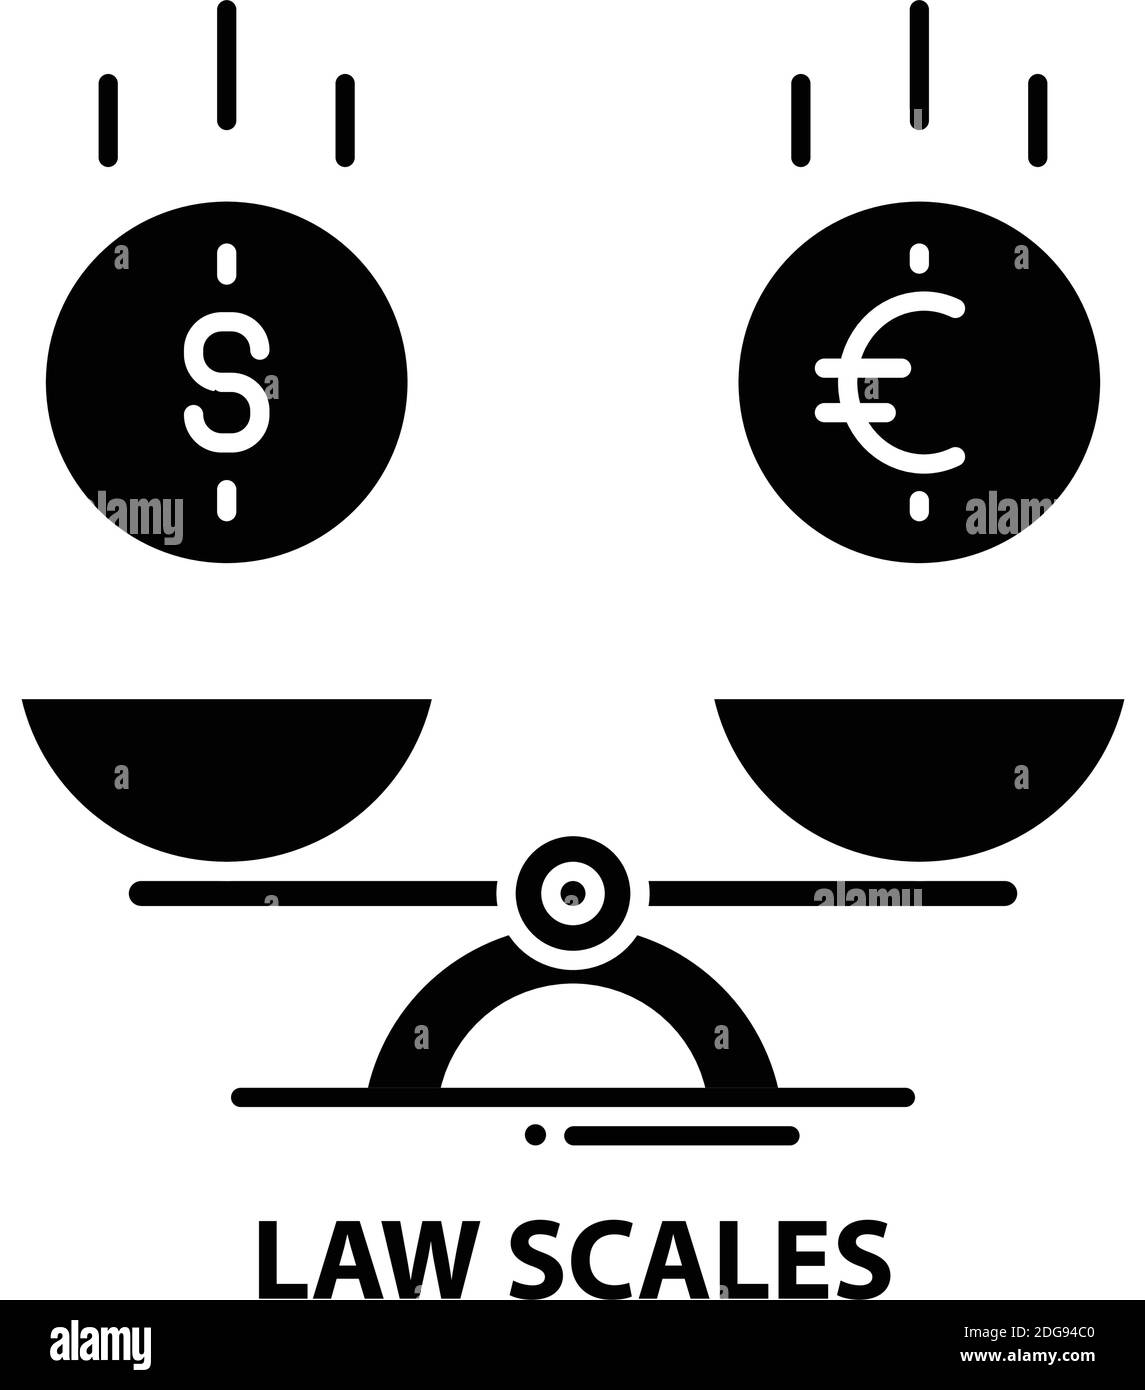 law scales symbol icon, black vector sign with editable strokes, concept illustration Stock Vector